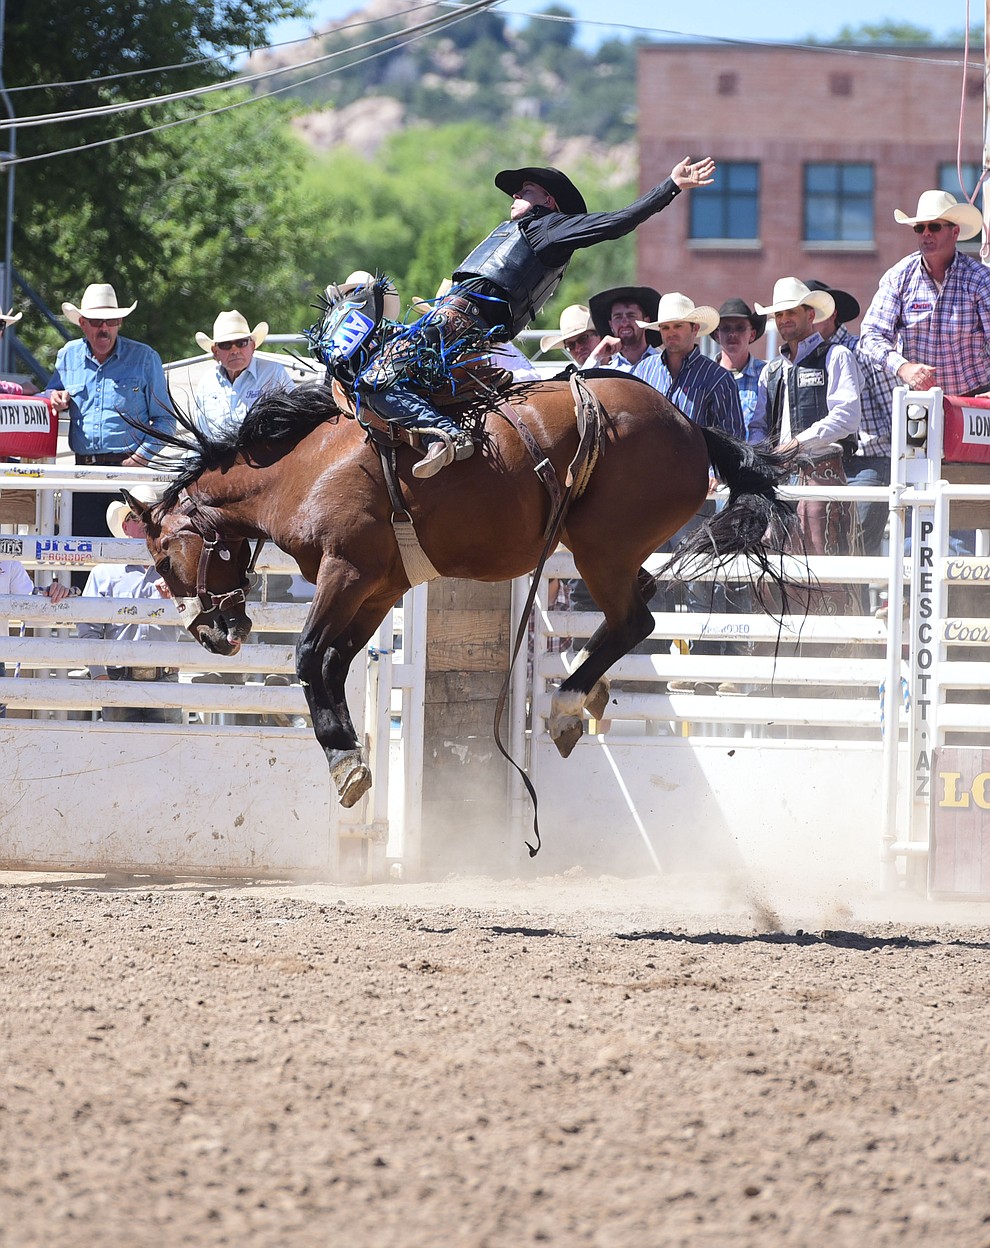 Zeke Thurston rides Ropin Dreams for a score of 86 in the saddle bronc during the 8th and final performance of the Prescott Frontier Days Rodeo Tuesday, July 4 at the Prescott Rodeo Grounds.  (Les Stukenberg/Courier)